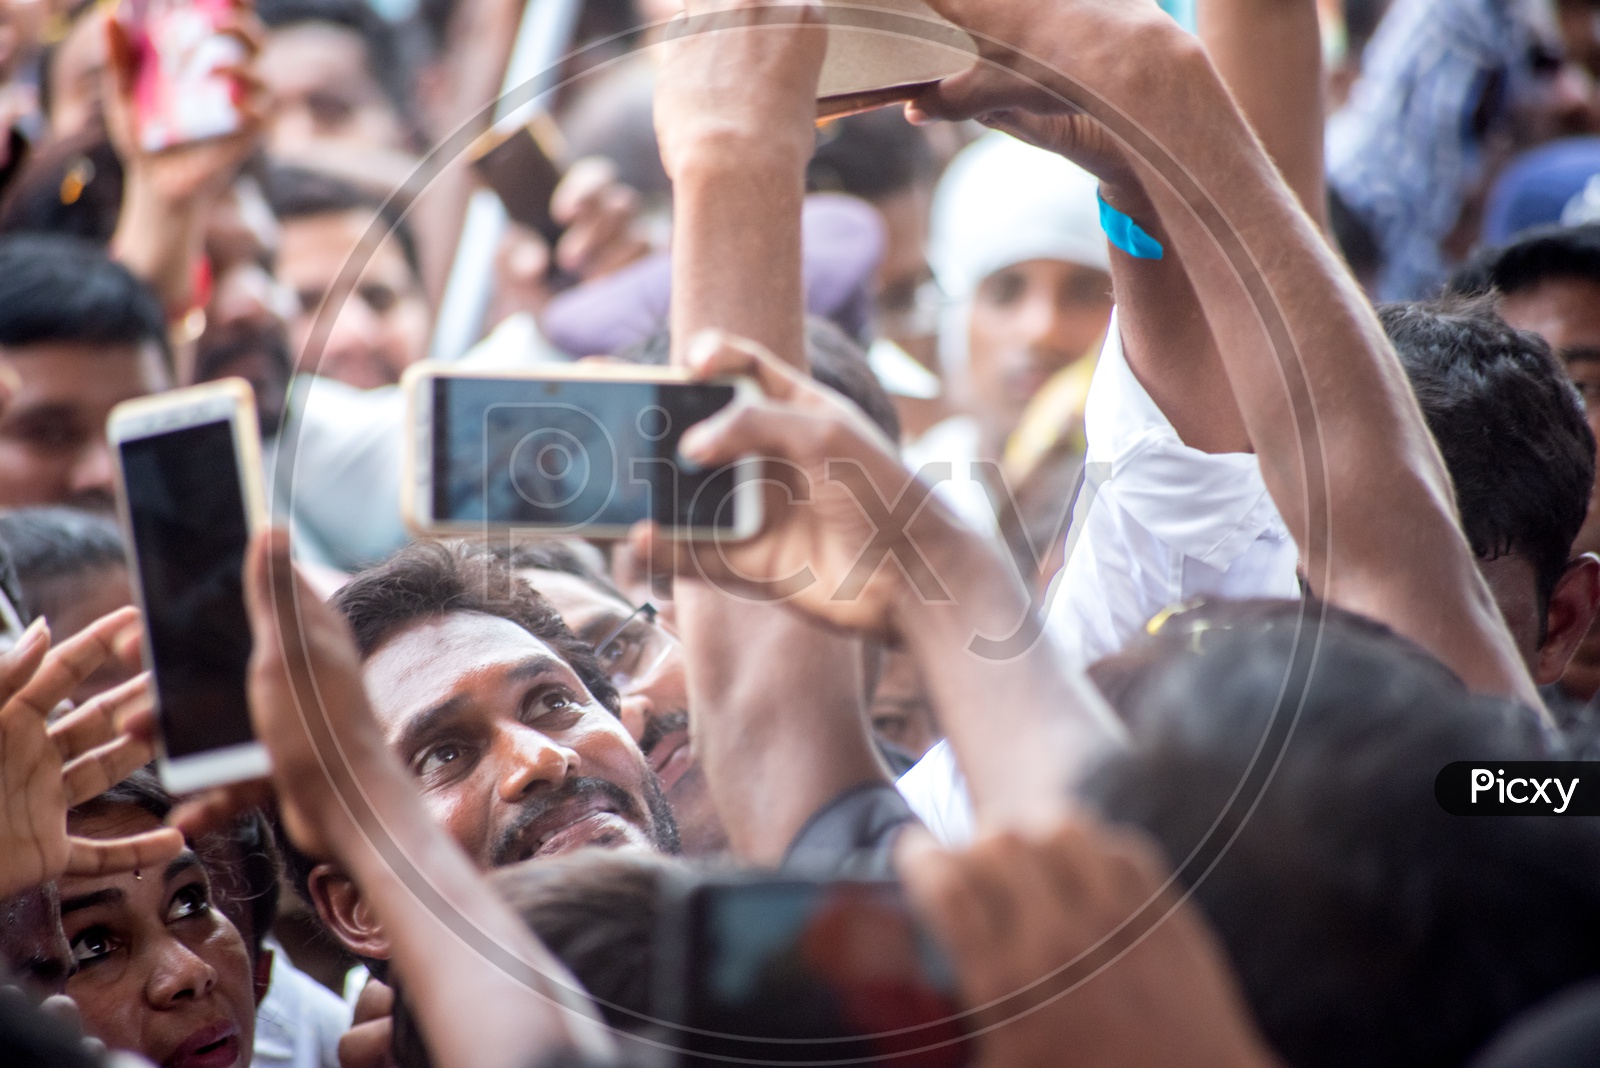 YS Jagan Mohan Reddy clicks pictures with fans